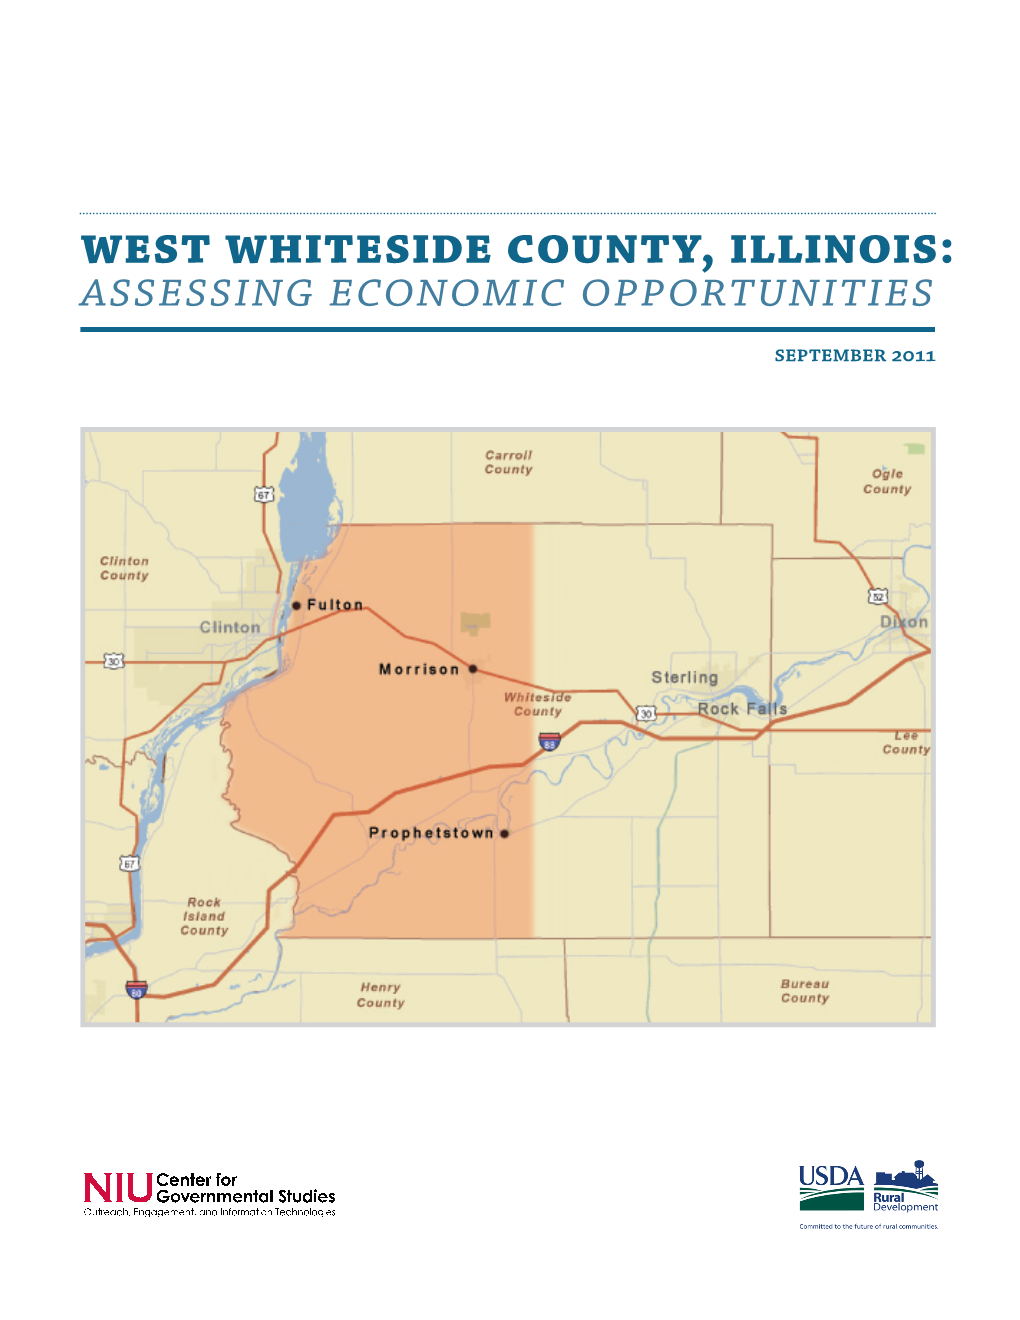 West Whiteside County, Illinois: Assessing Economic Opportunities